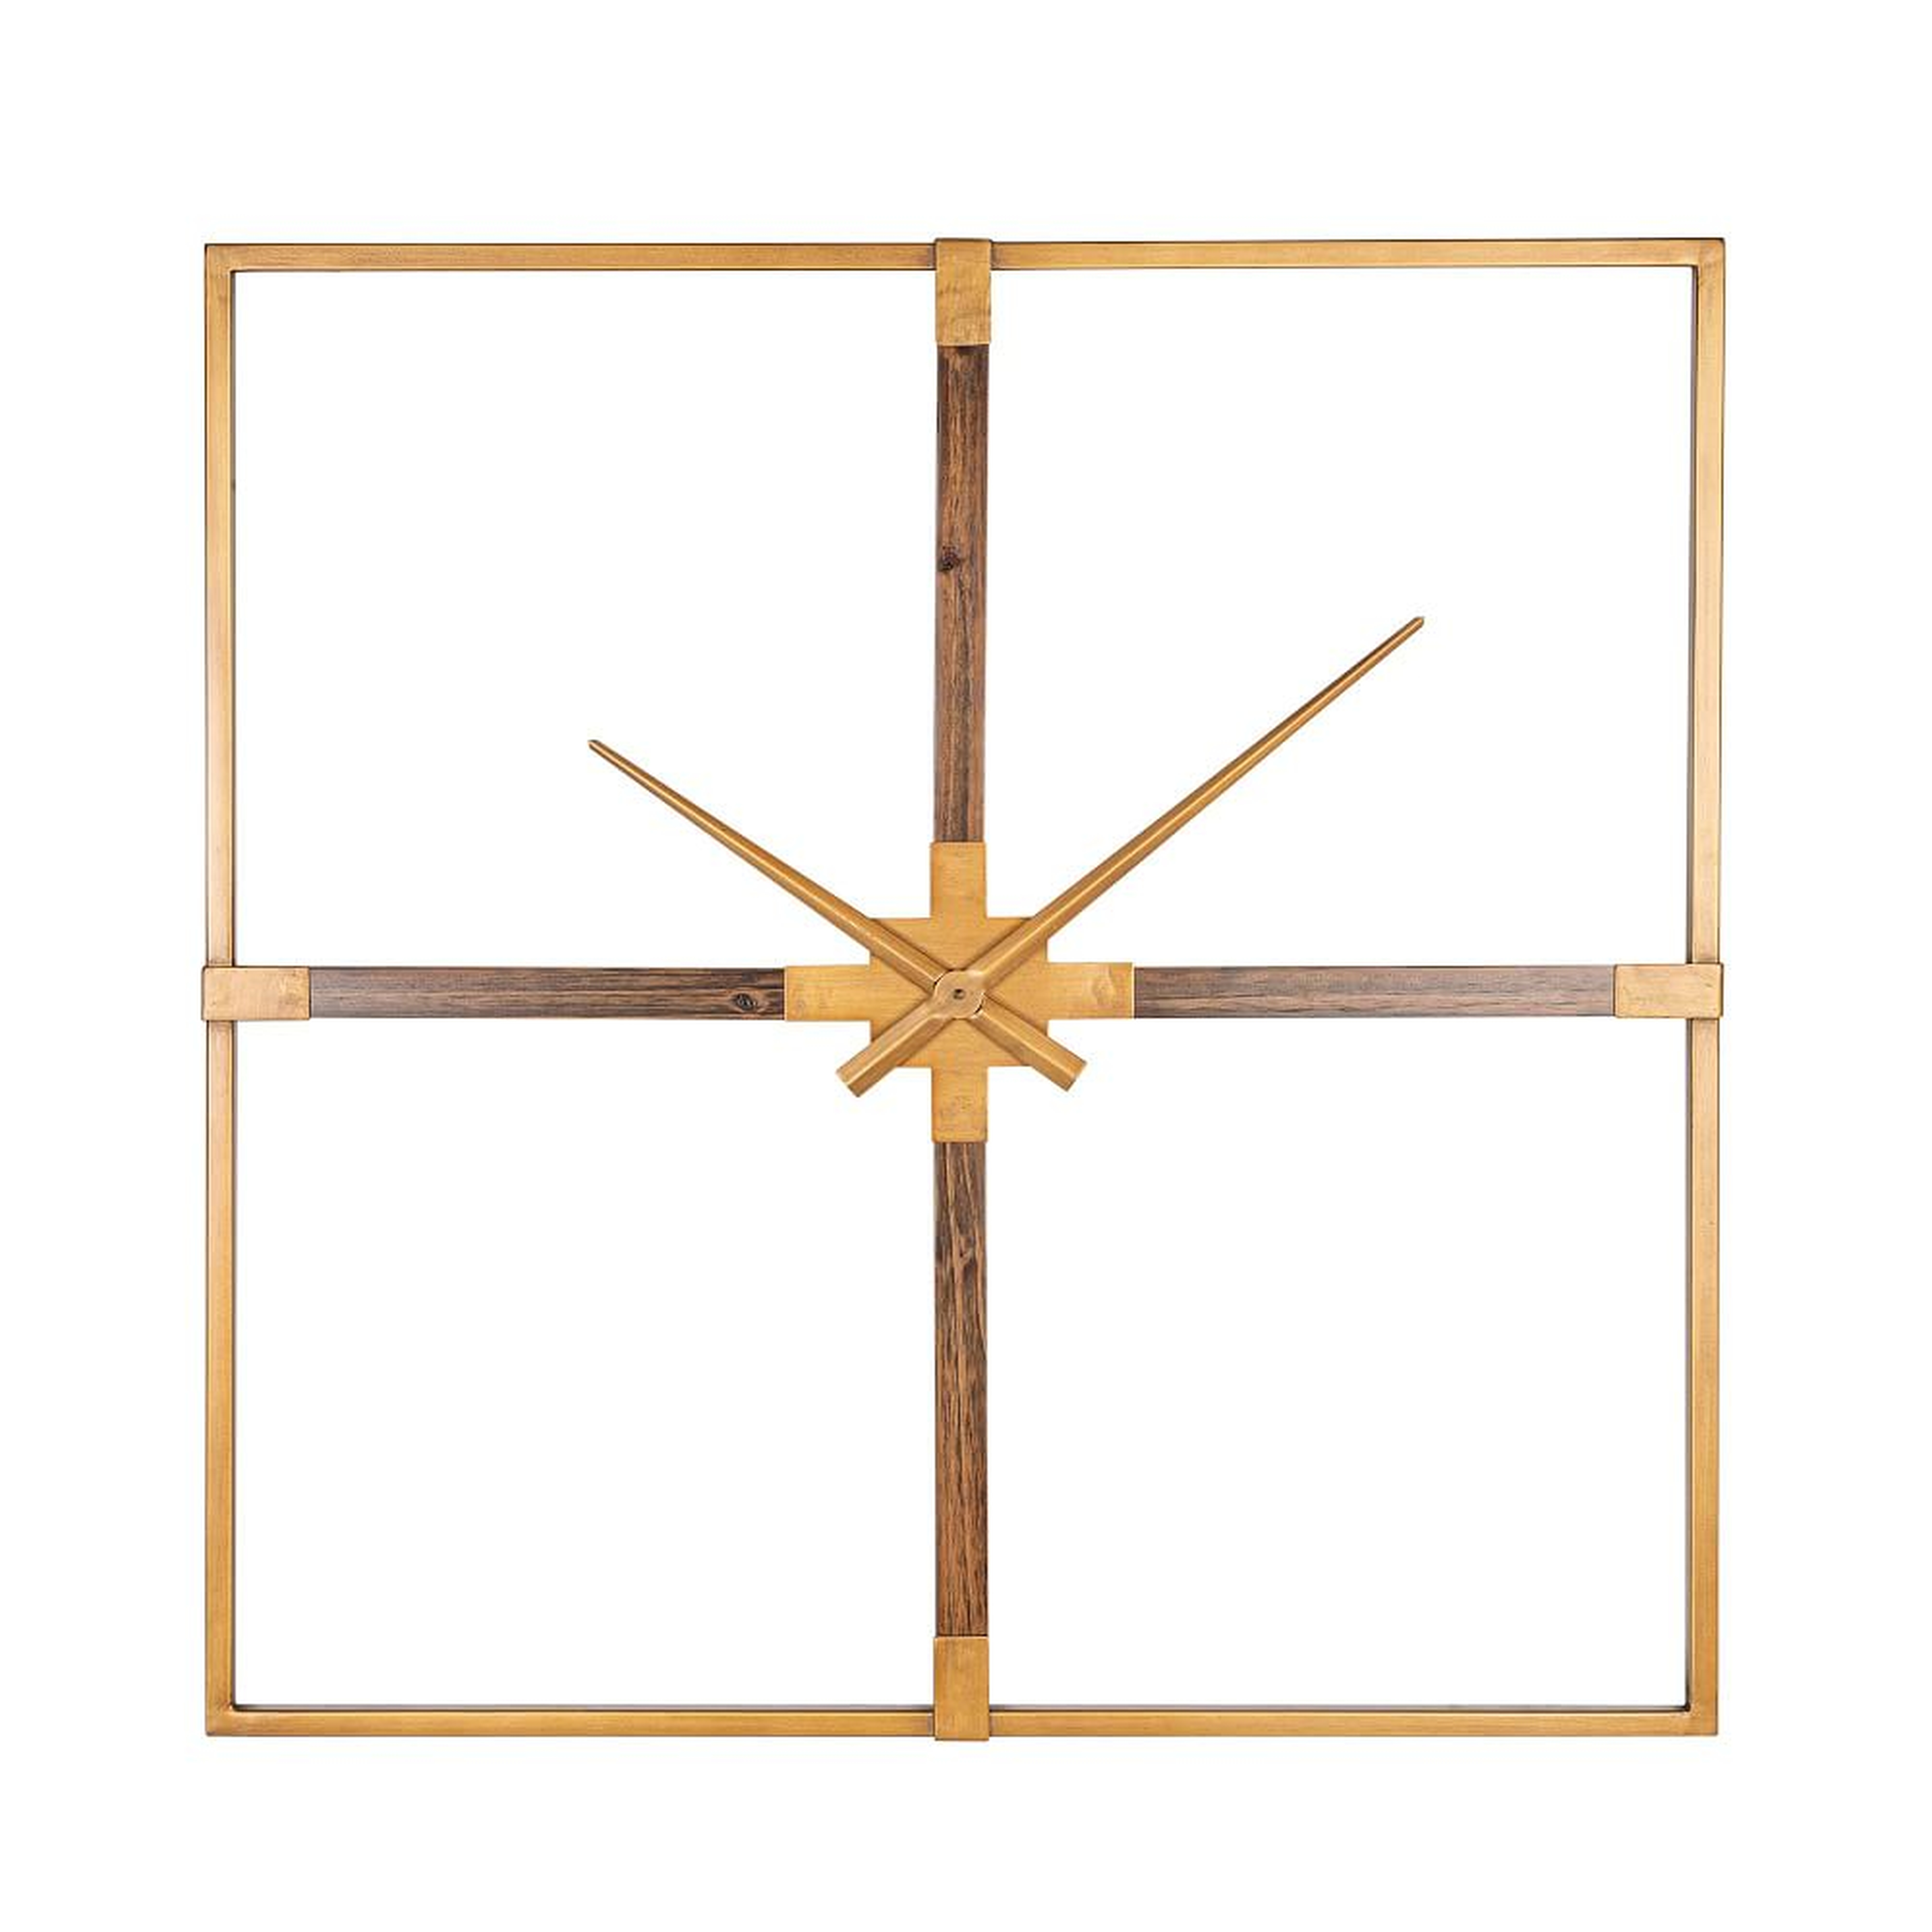 Holly Wall Clock, Gold & Wood - West Elm